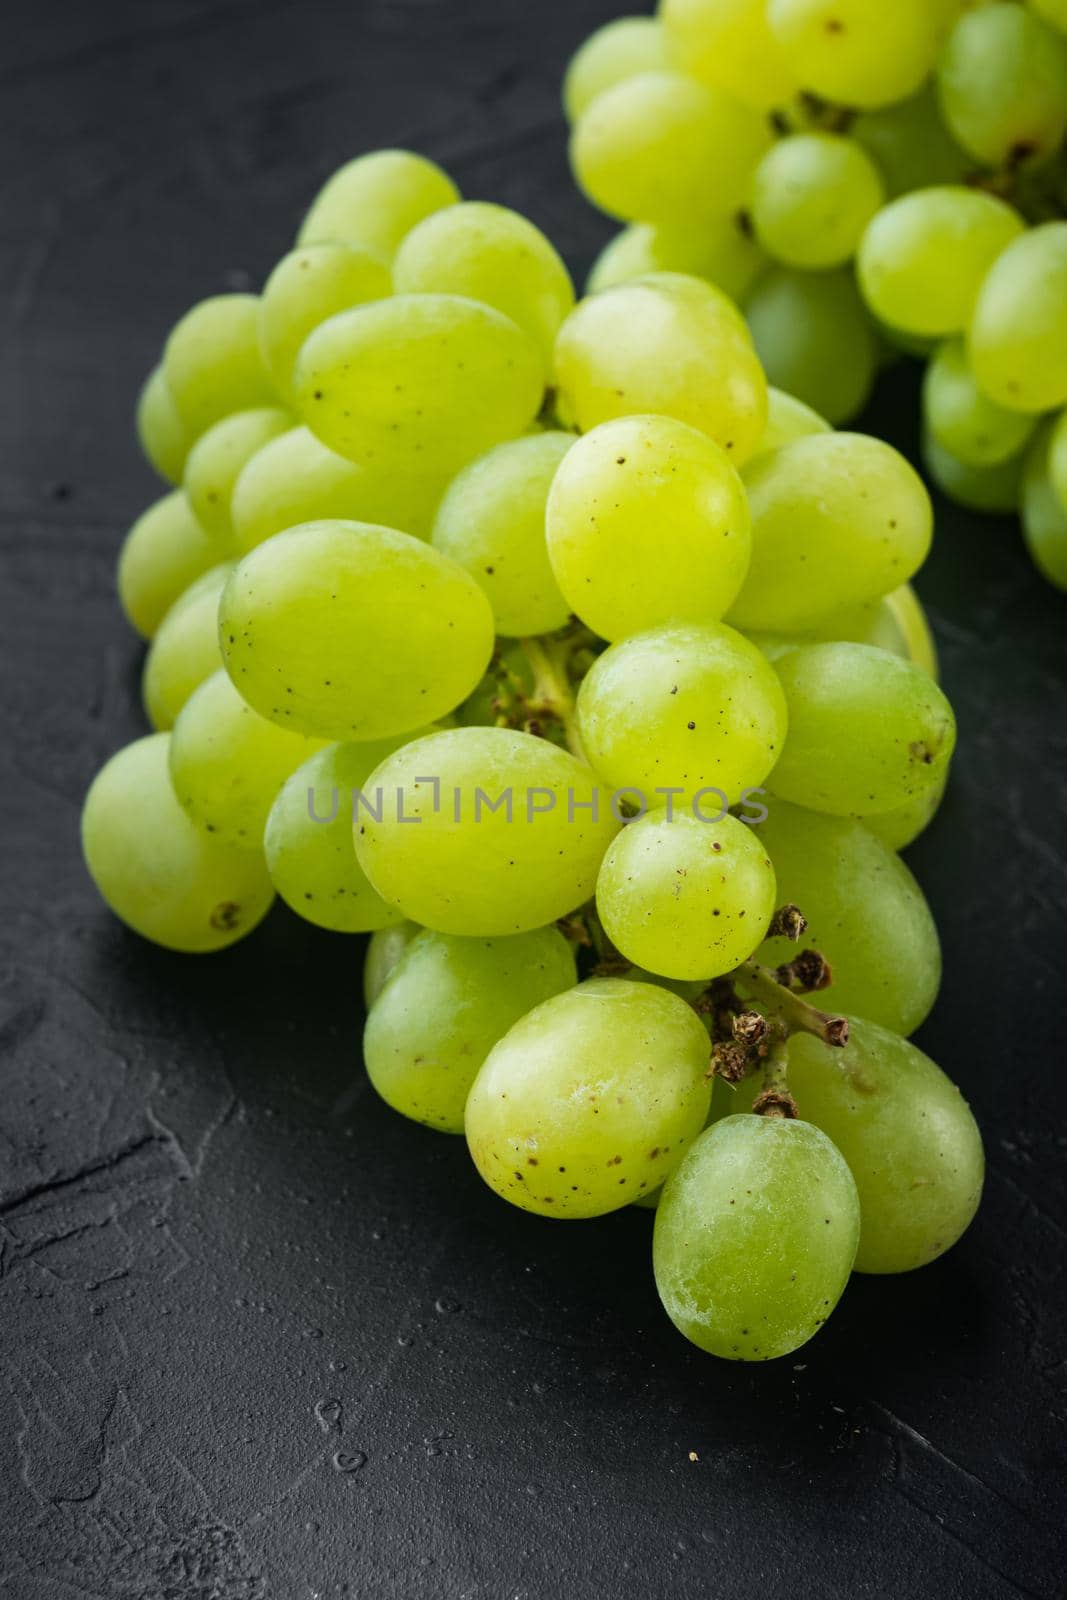 Red and white grapes set, green fruits, on black stone background